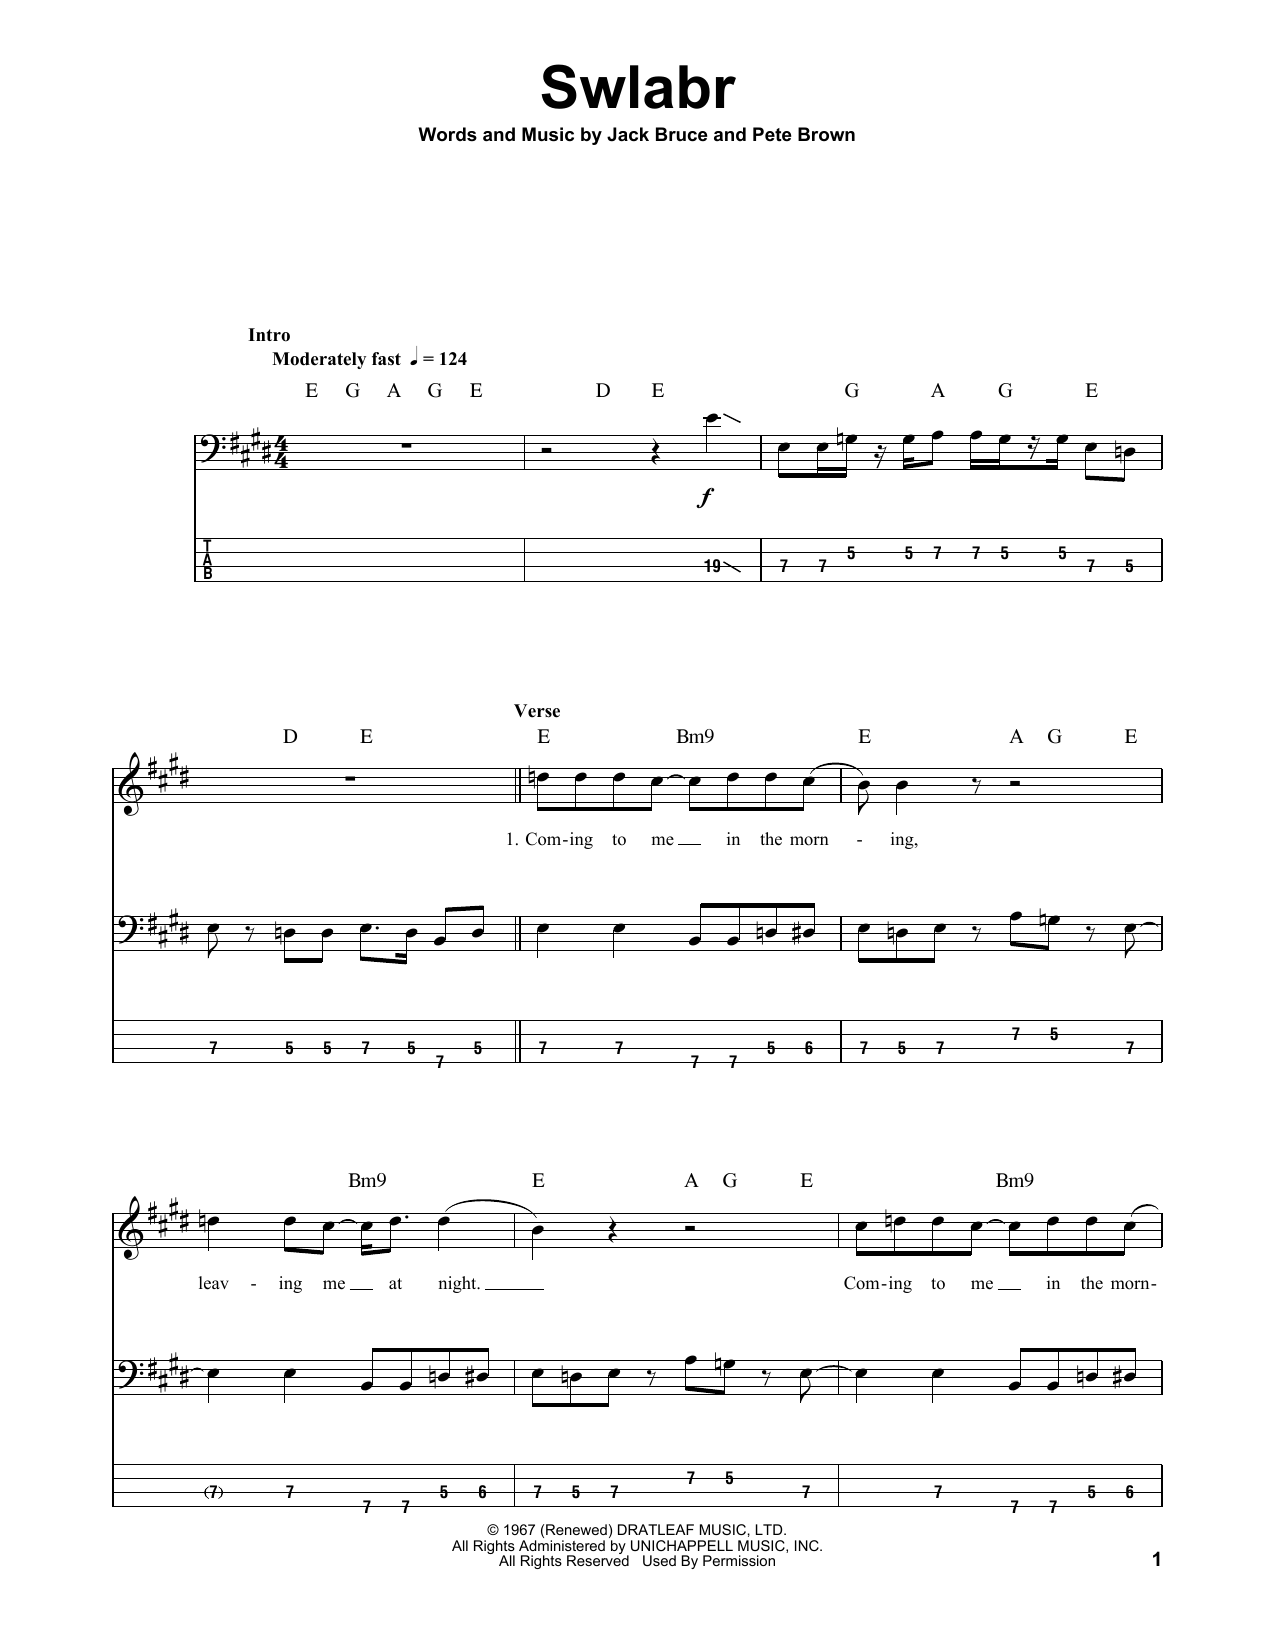 Download Cream Swlabr Sheet Music